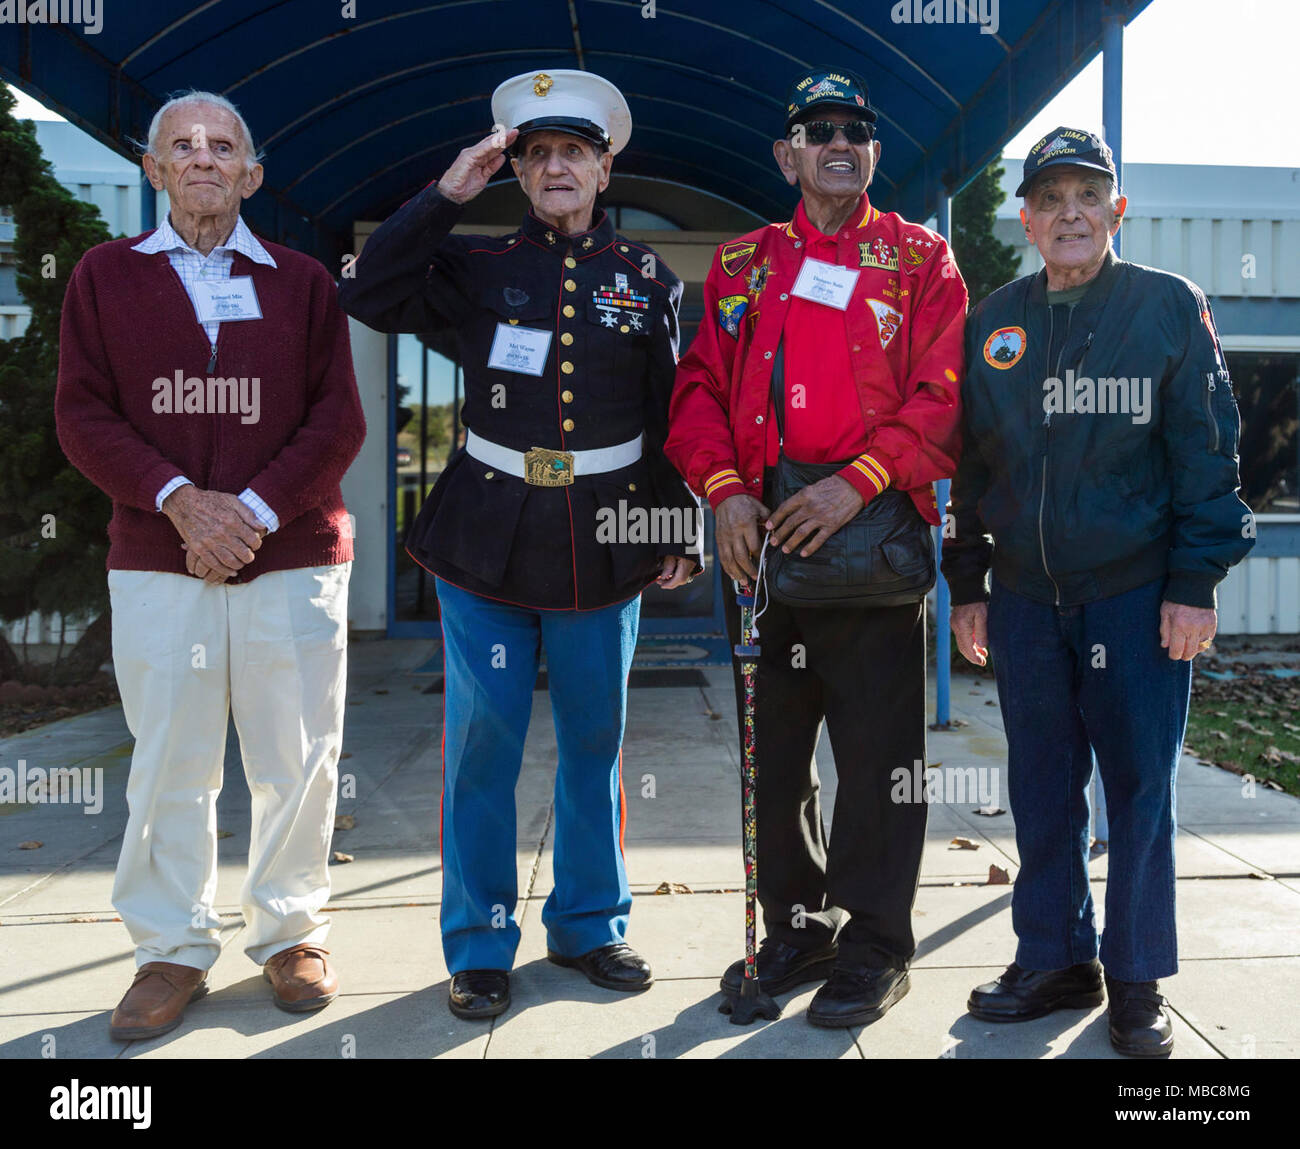 U.S. Marine Corps Iwo Jima veterans pose for a group photo during a tour of Marine Corps Base Camp Pendleton in commemoration of the 73d Anniversary of the Battle of Iwo Jima, Feb 15, 2018. Iwo Jima was a major World War II battle in which the United States Marine Corps landed on and eventually captured the island of Iwo Jima from the Japanese Imperial Army. Veterans of the battle and their family members were invited to Camp Pendleton for a tour which included a special reaction team static display, Meal Ready to Eat sampling, and a tour of the Assault Craft Unit-5. (U.S. Marine Corps Stock Photo